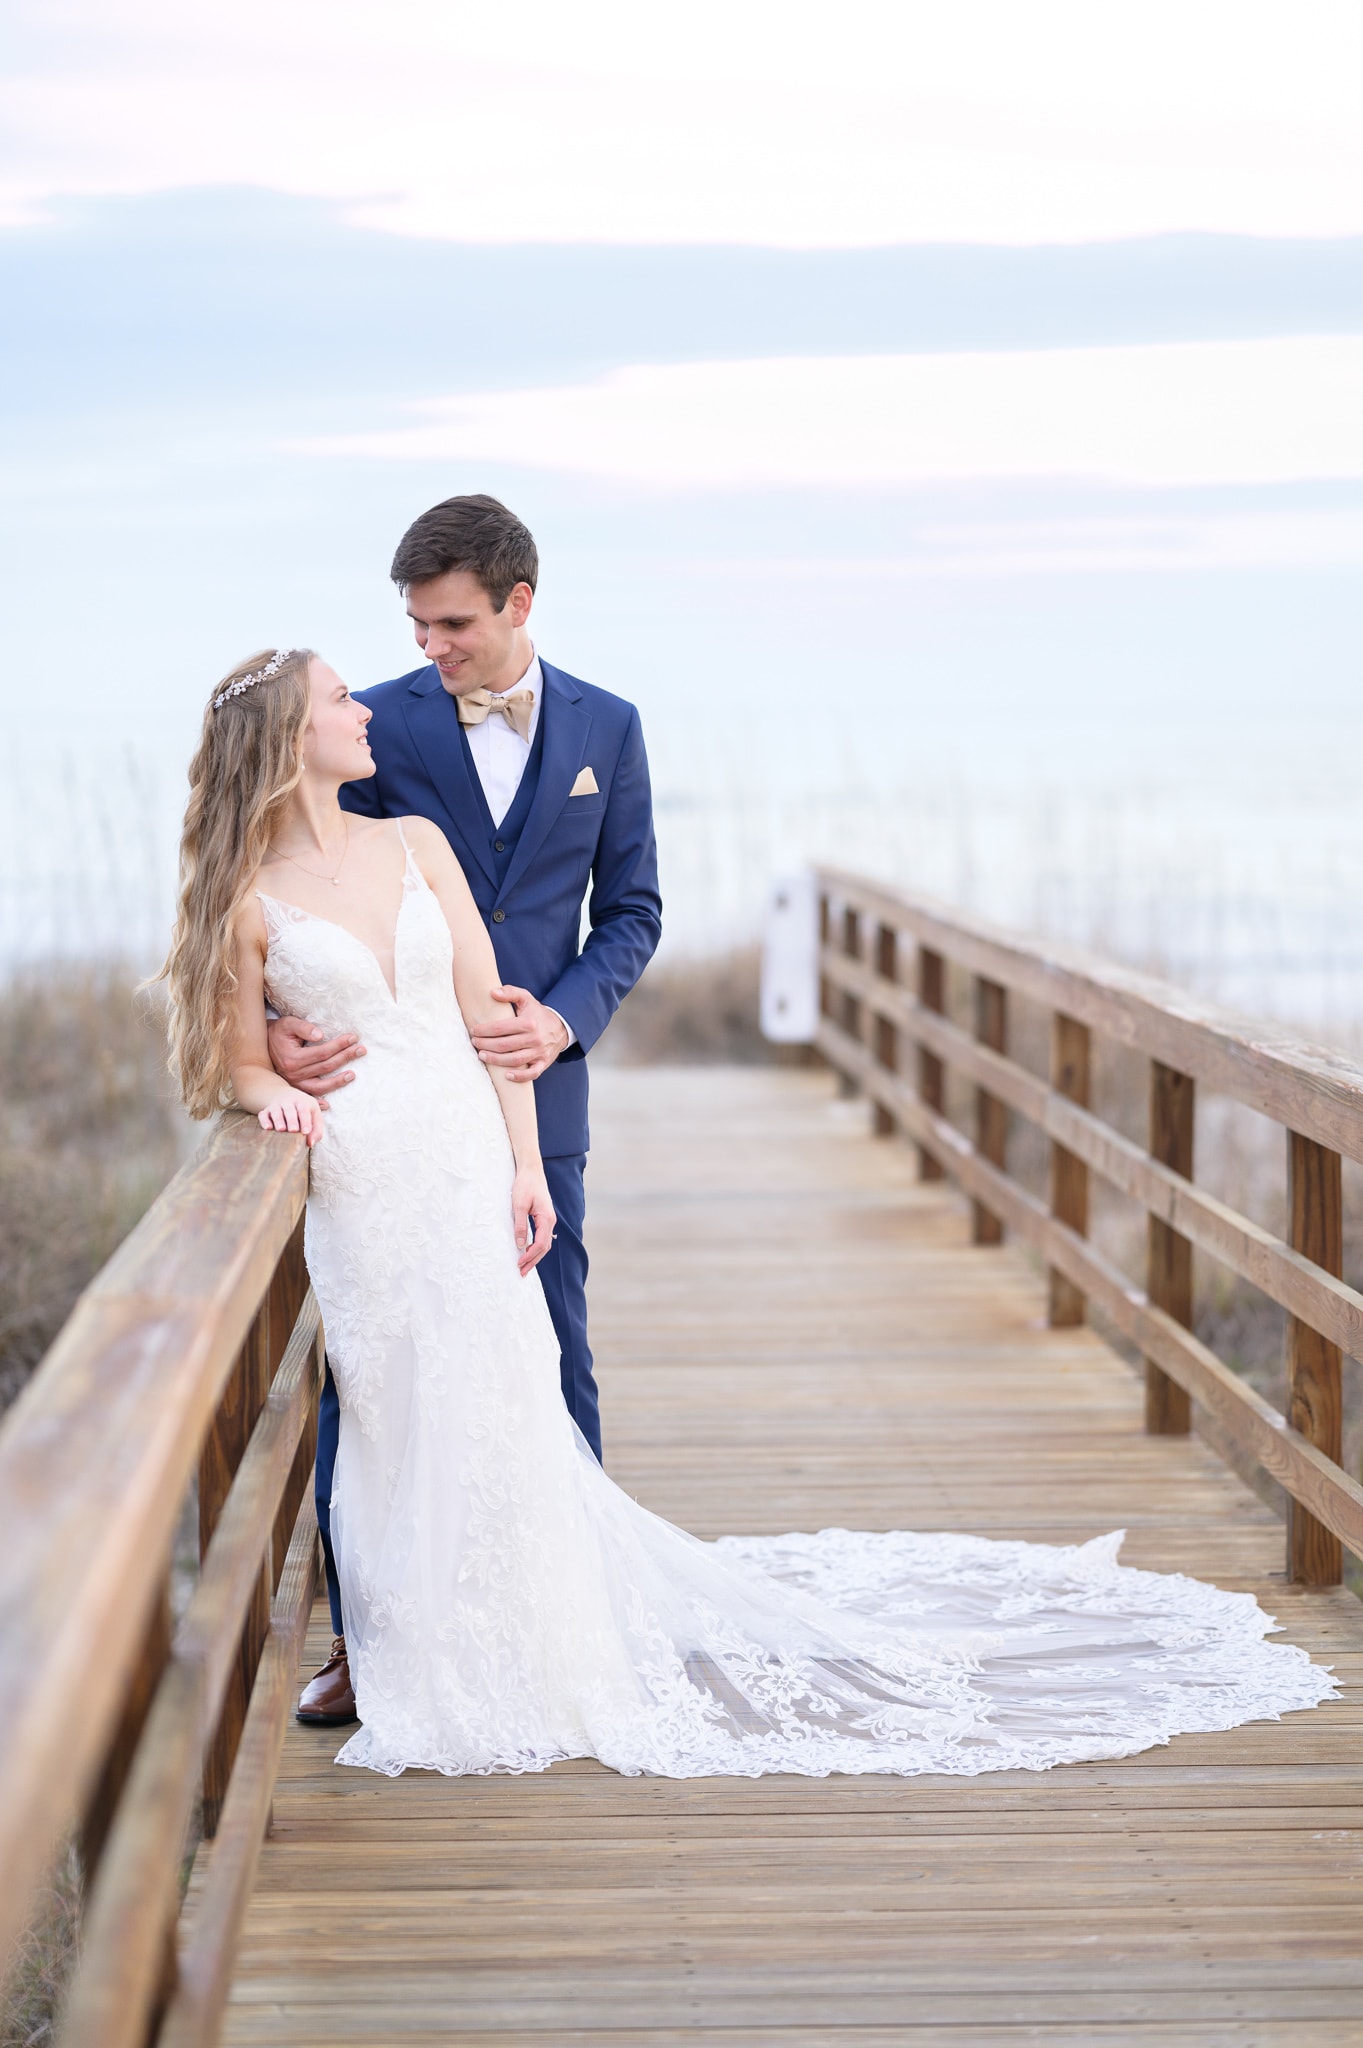 Embracing on the boardwalk -